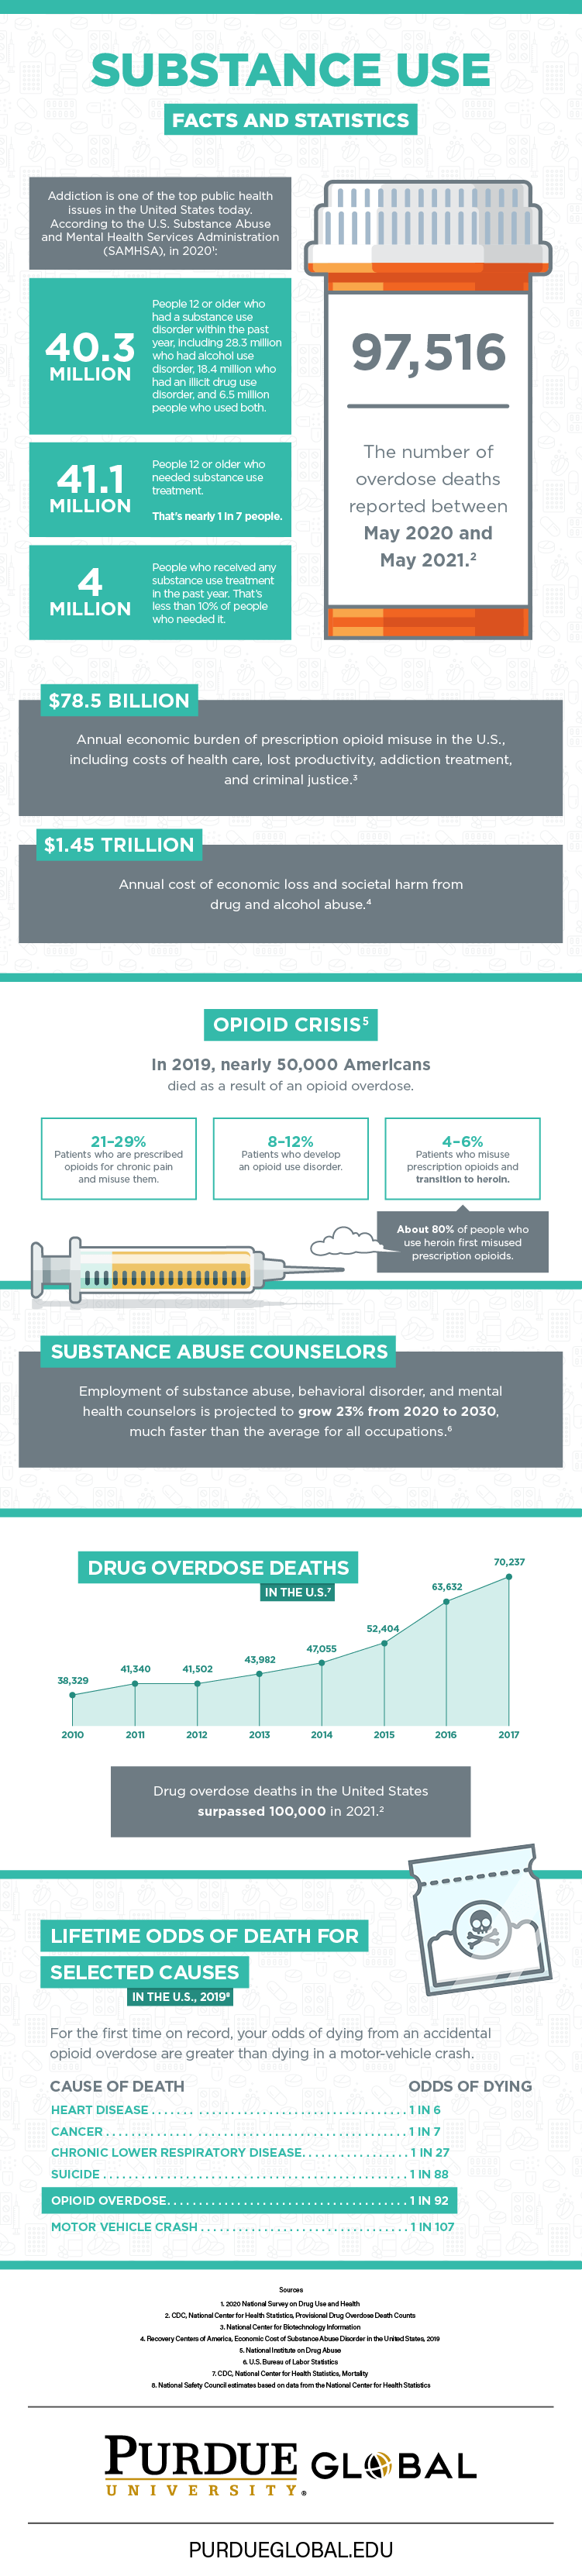 Substance Use Facts and Statistics Infographic